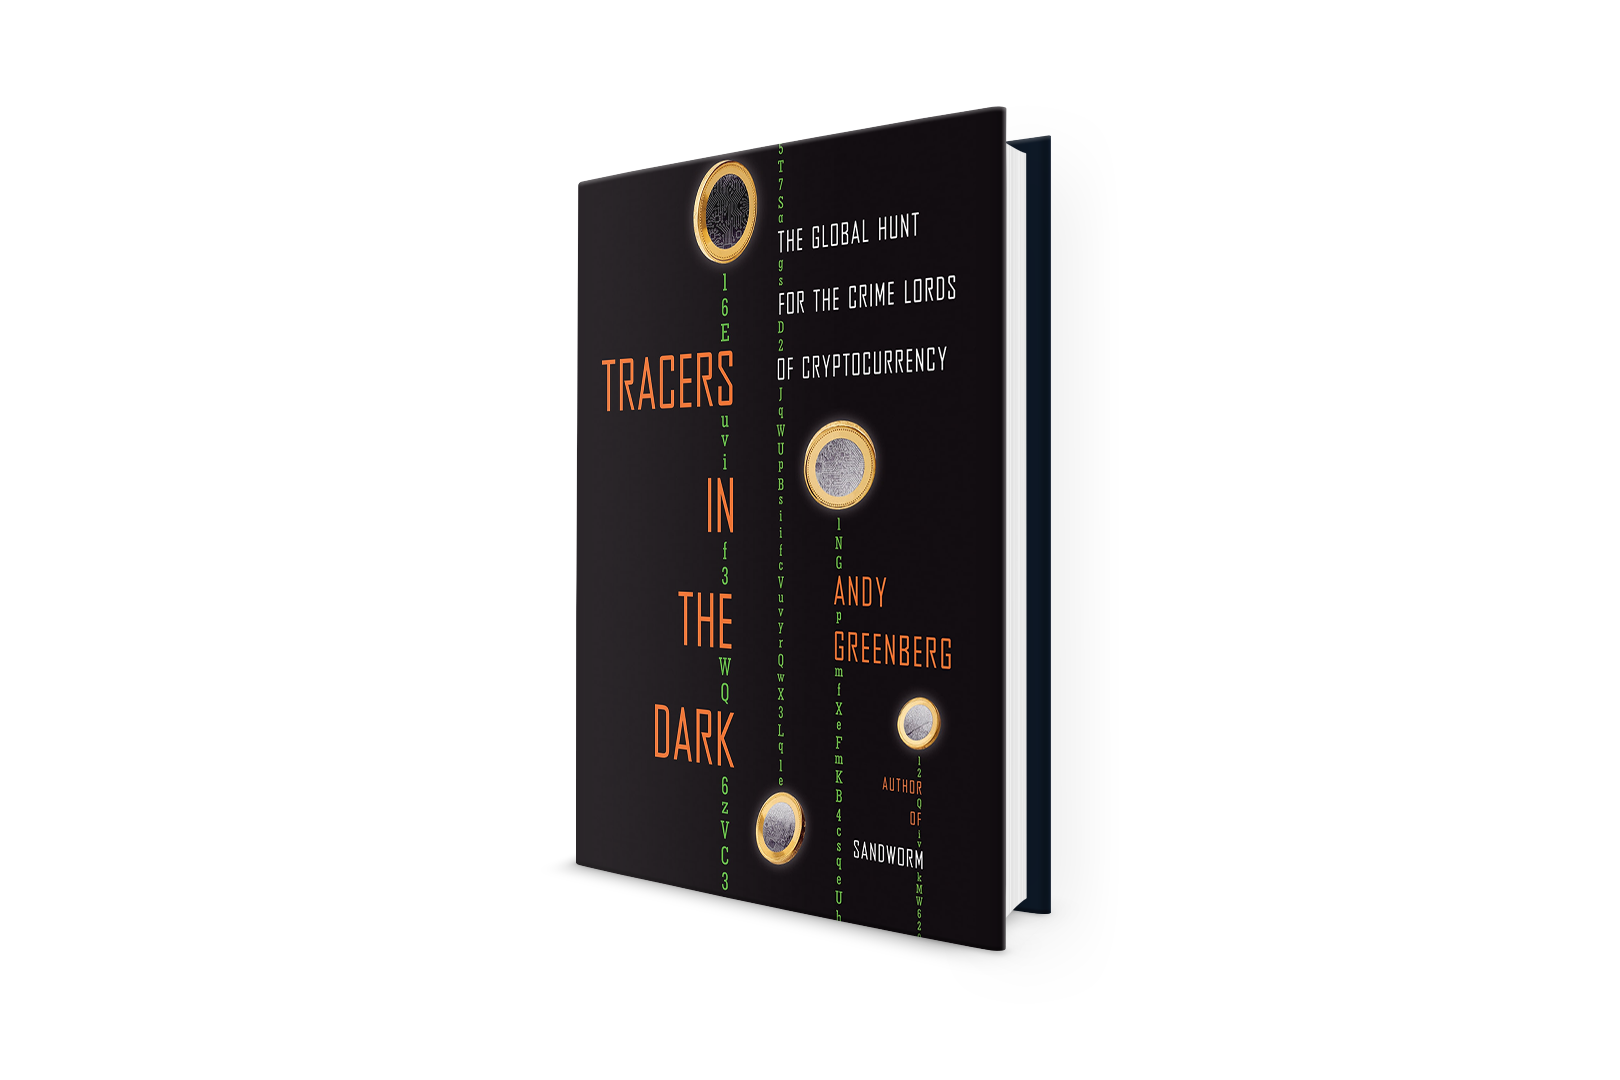 3d image of Tracers in the Dark book